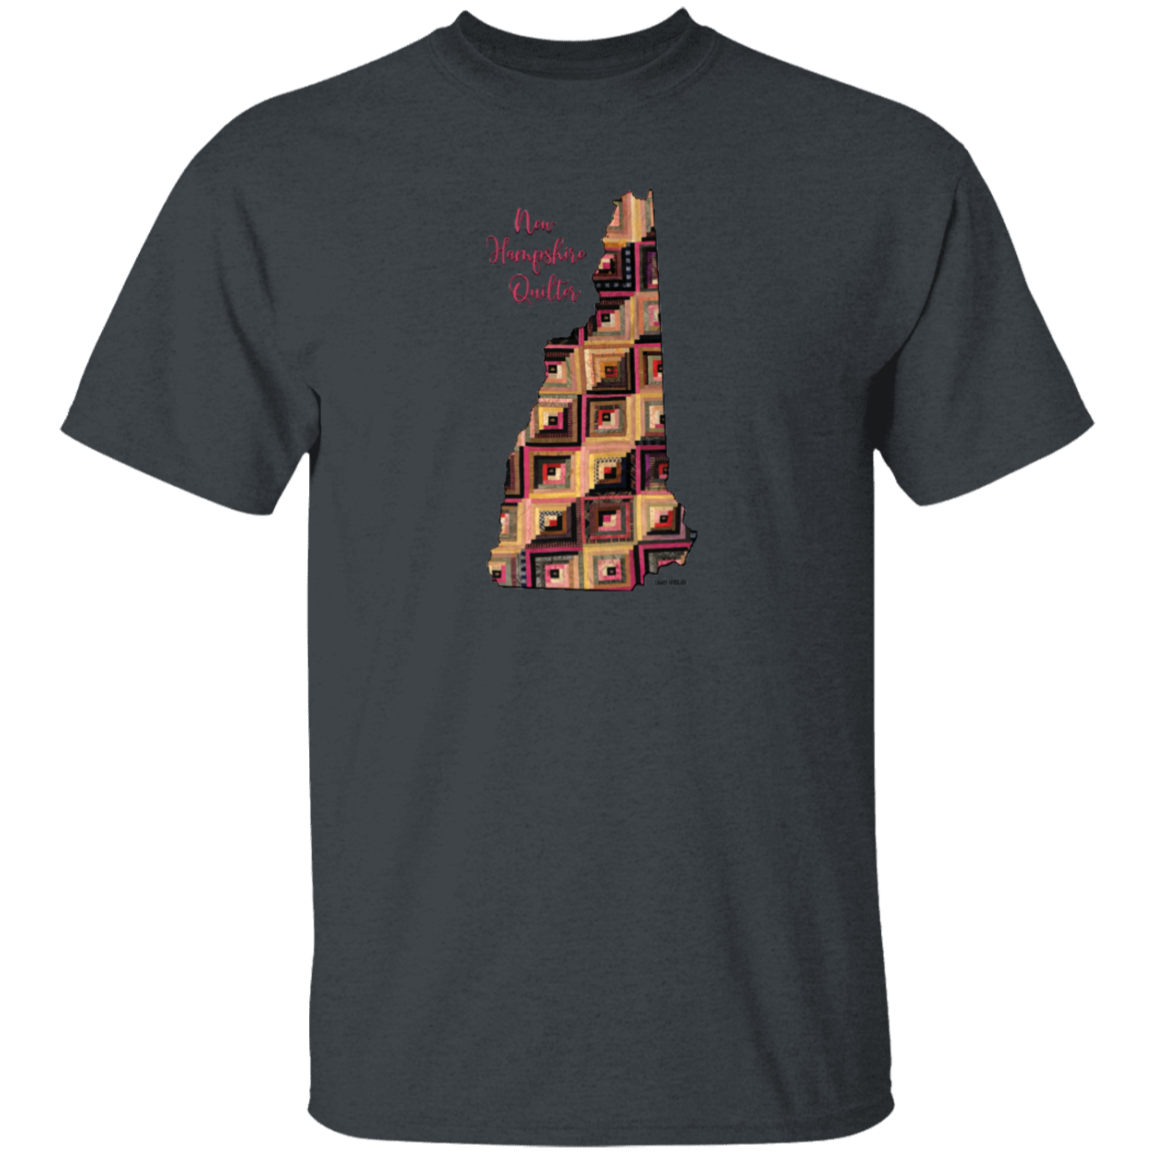 New Hampshire Quilter T-Shirt, Gift for Quilting Friends and Family